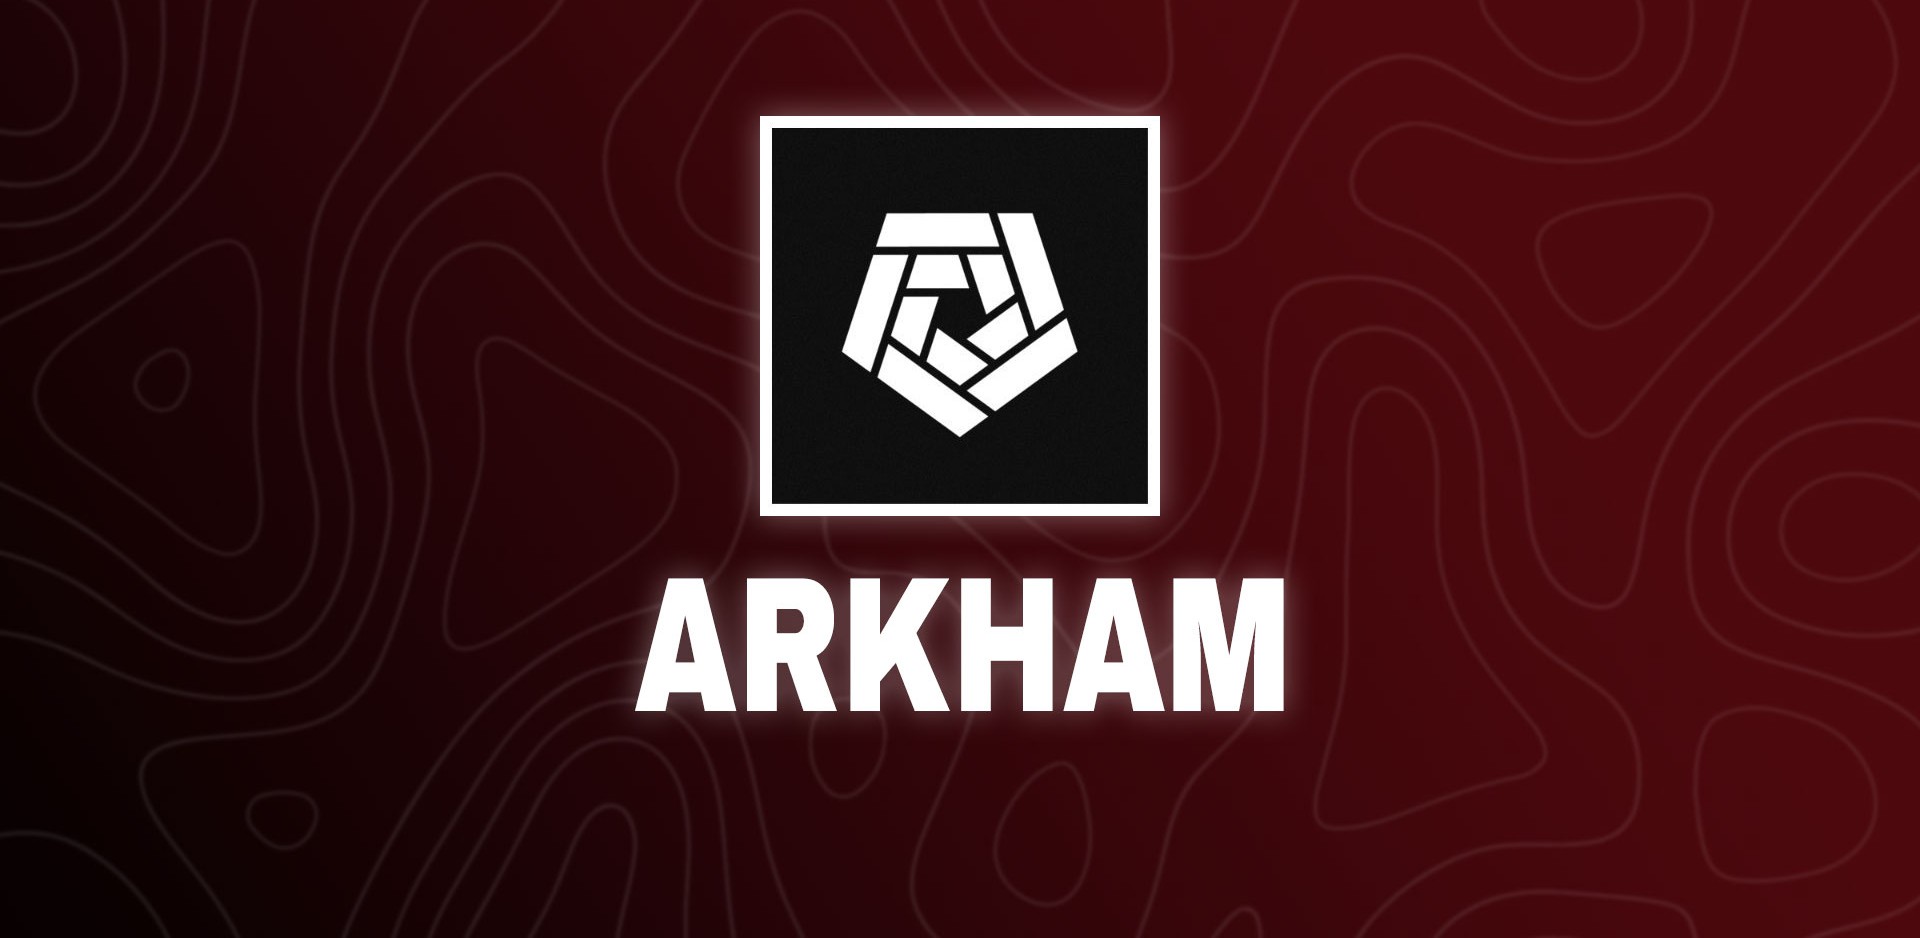 Will Arkham Carry Out Another Airdrop?